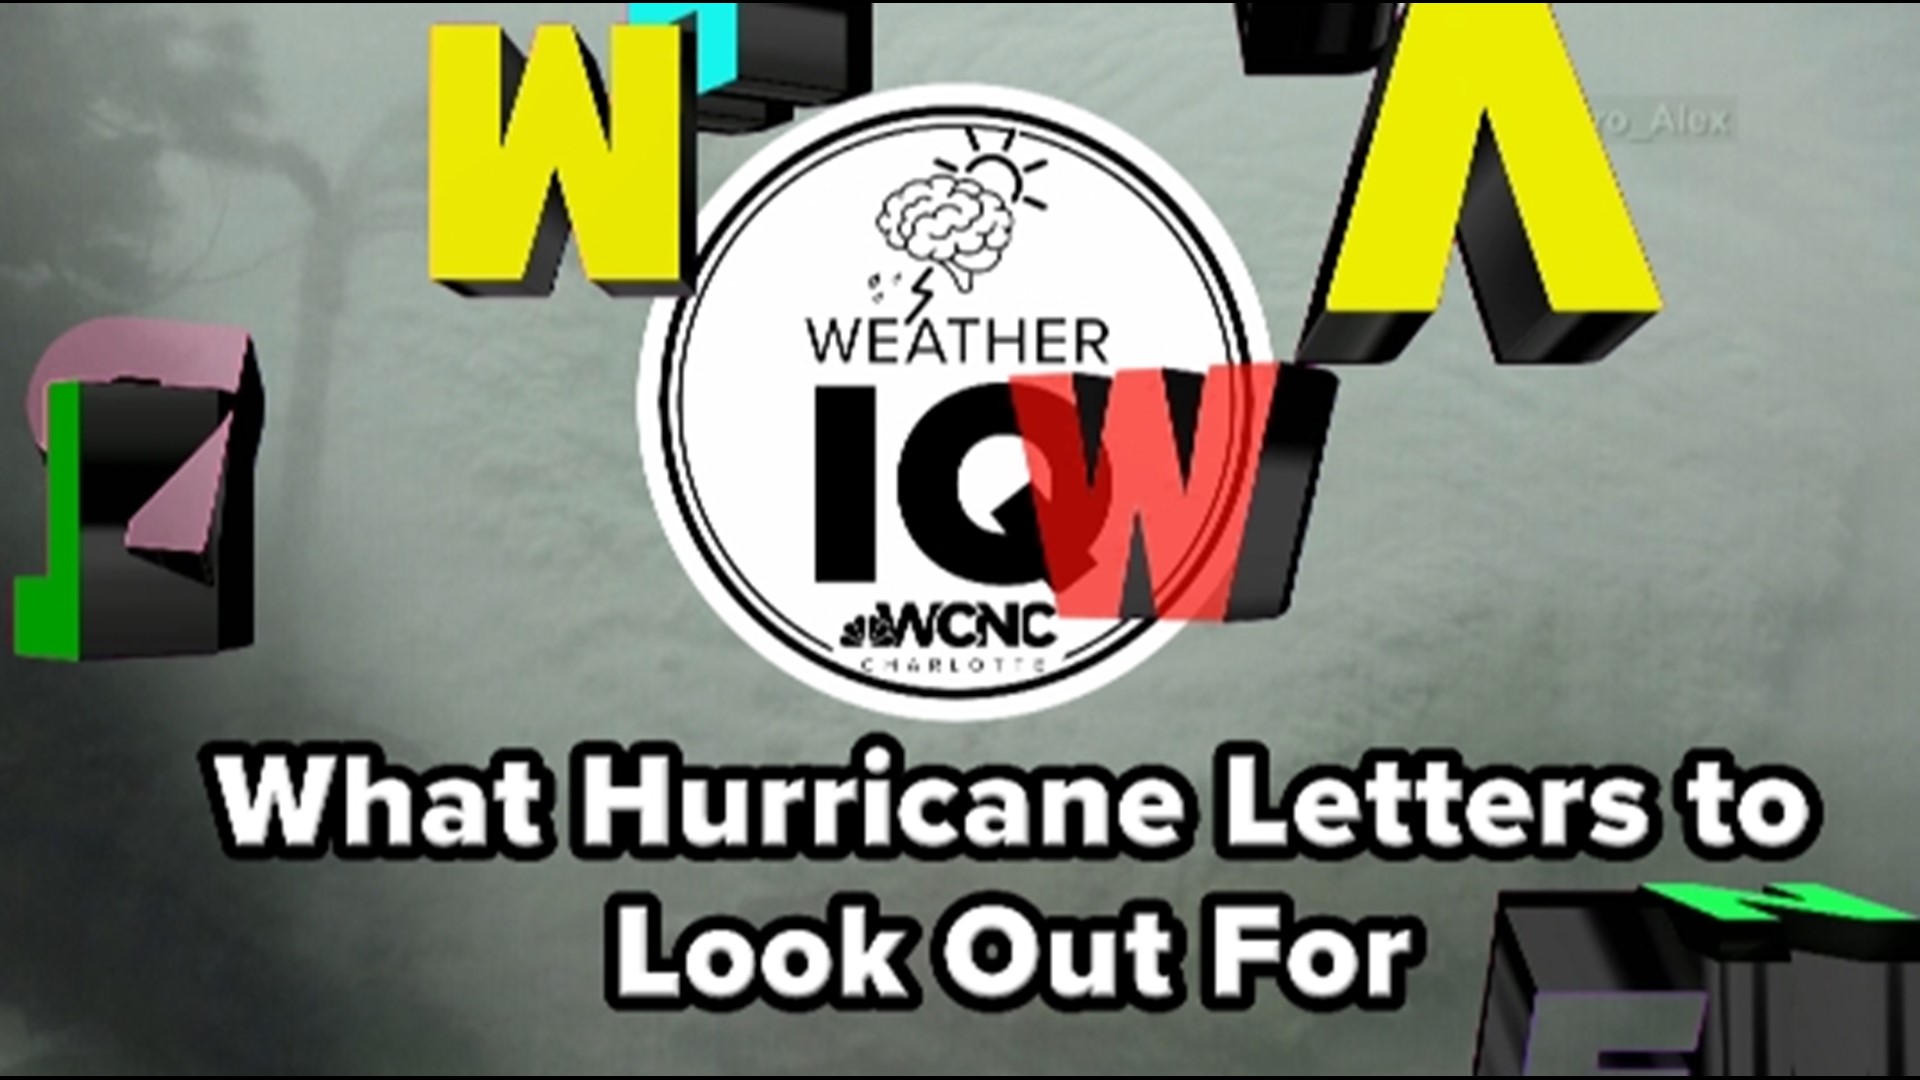 The letter that is retired most during hurricane season